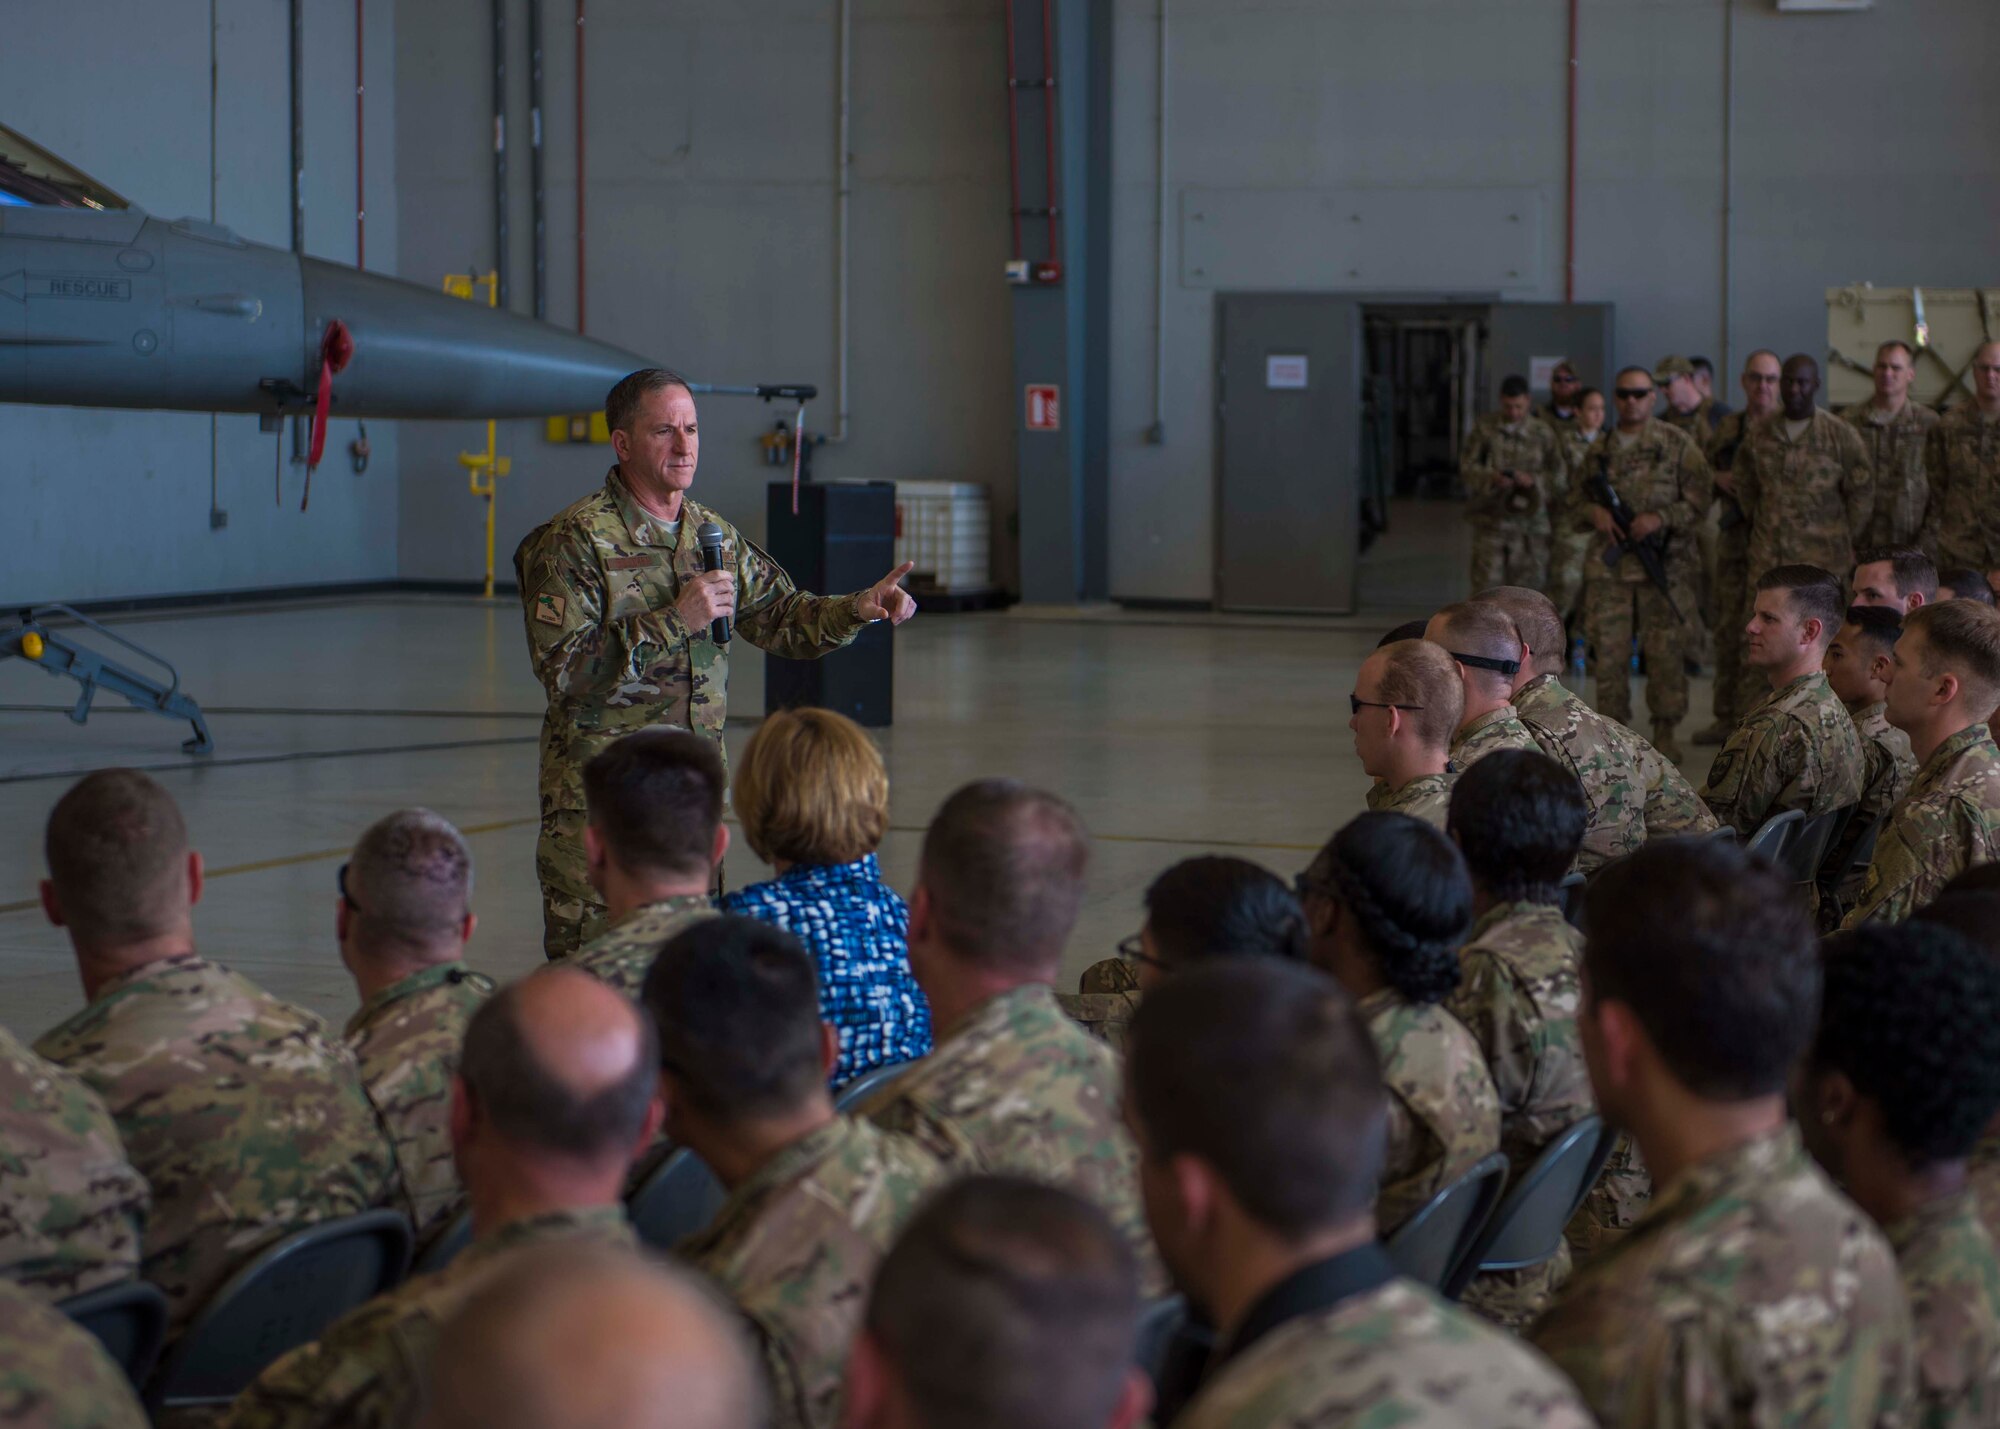 Air Force Chief of Staff Gen. David L. Goldfein speaks during an all call, Bagram Airfield, Afghanistan, Aug. 13, 2016. In his first visit as Chief of Staff to Bagram, Goldfein recognized several Airmen for outstanding performance and met with servicemembers to talk about his top priorities and the future of the Air Force. (U.S. Air Force photo by Senior Airman Justyn M. Freeman)